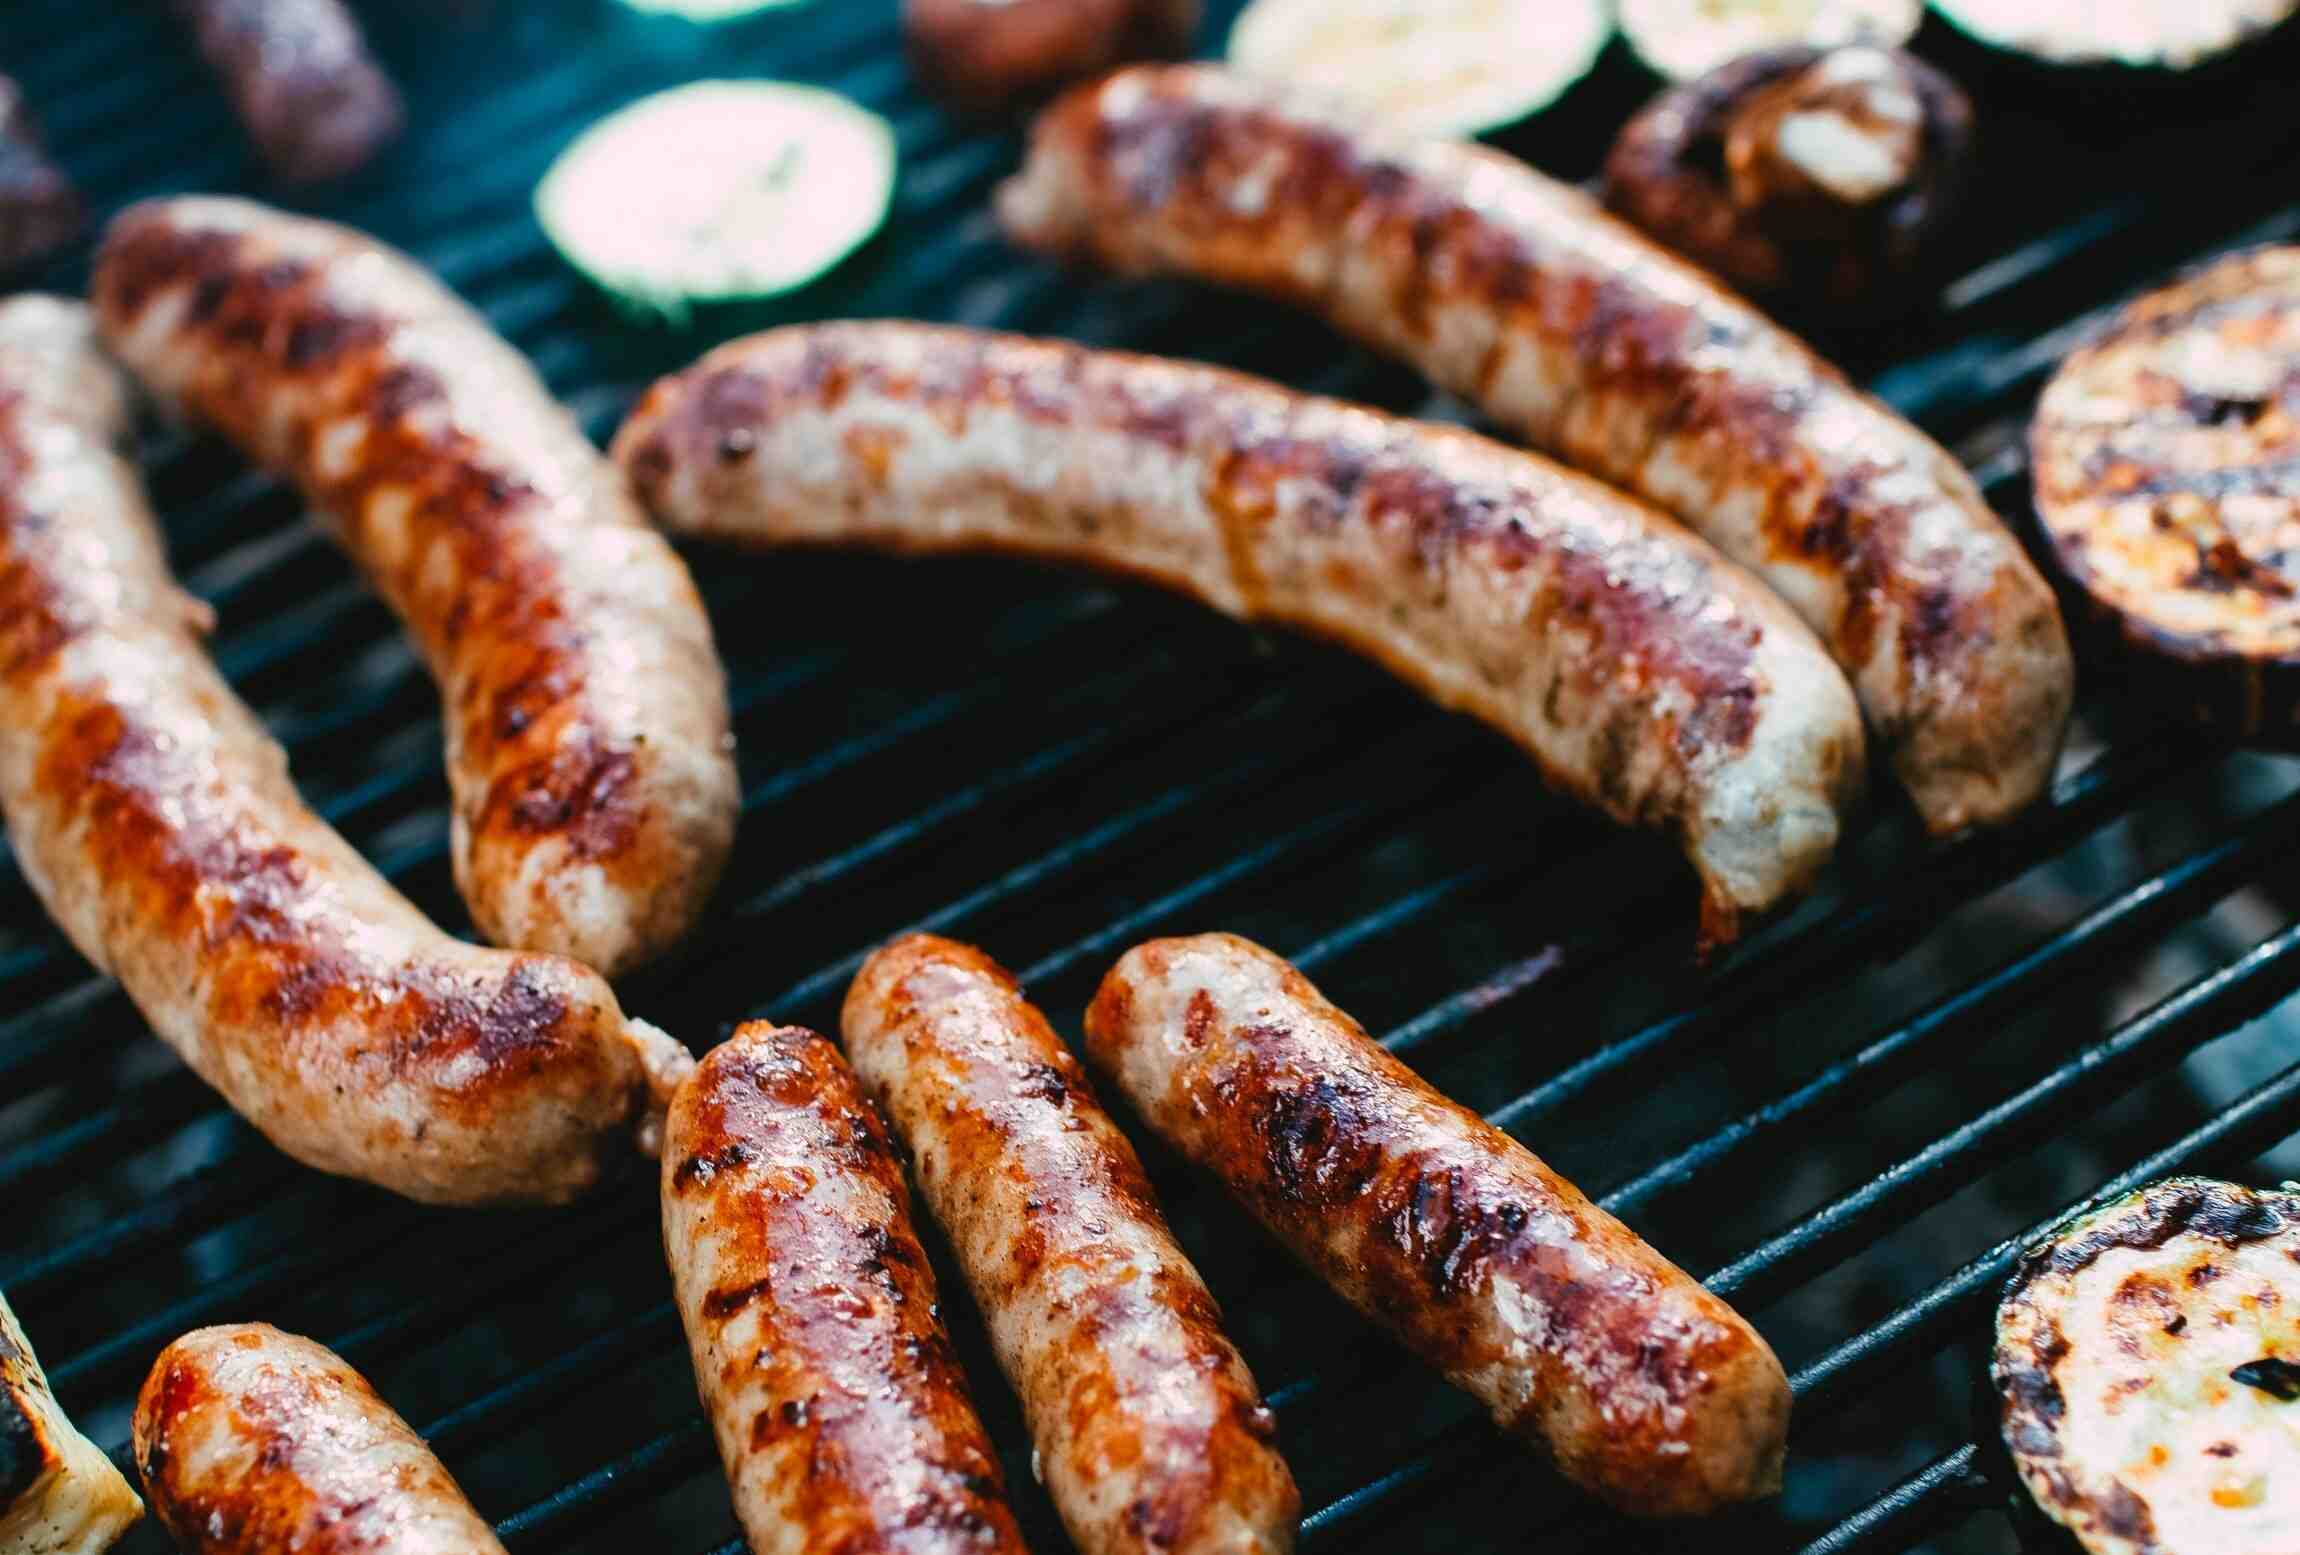 How do I stop my sausage from bursting?